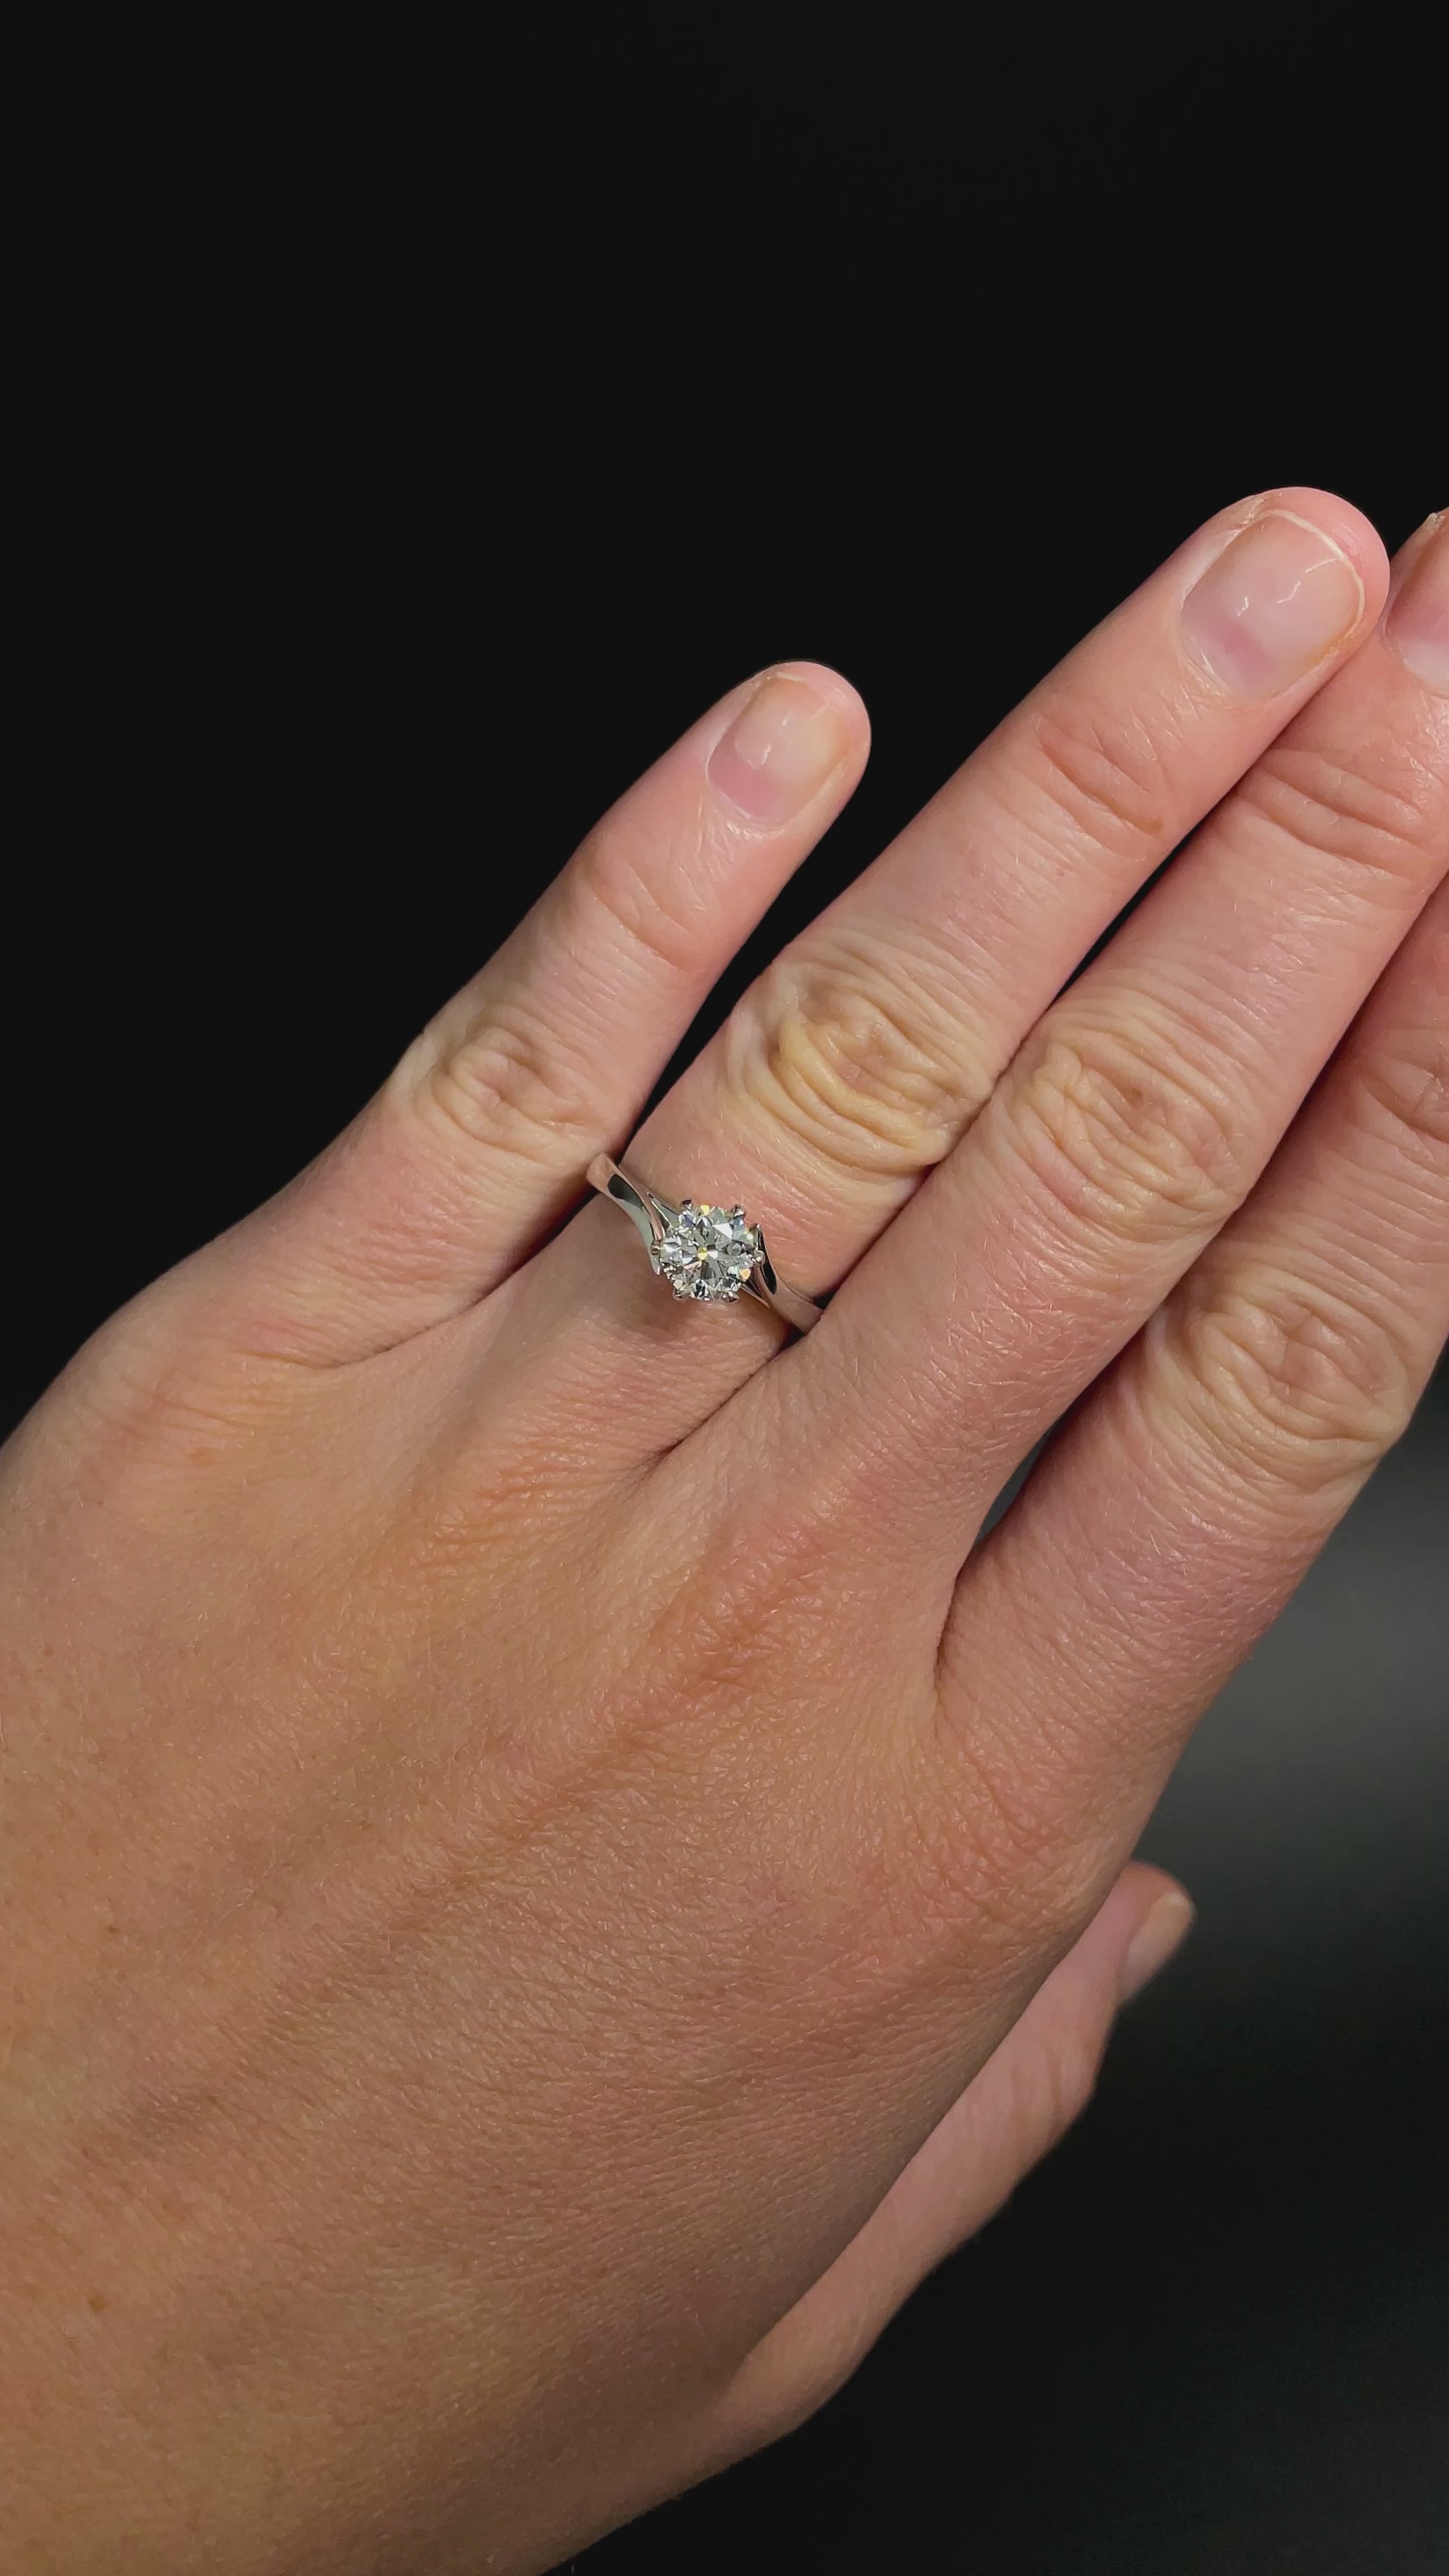 1.01 Carat Solitaire Diamond Engagement Ring available at LeGassick Diamonds and Jewellery Gold Coast, Australia.